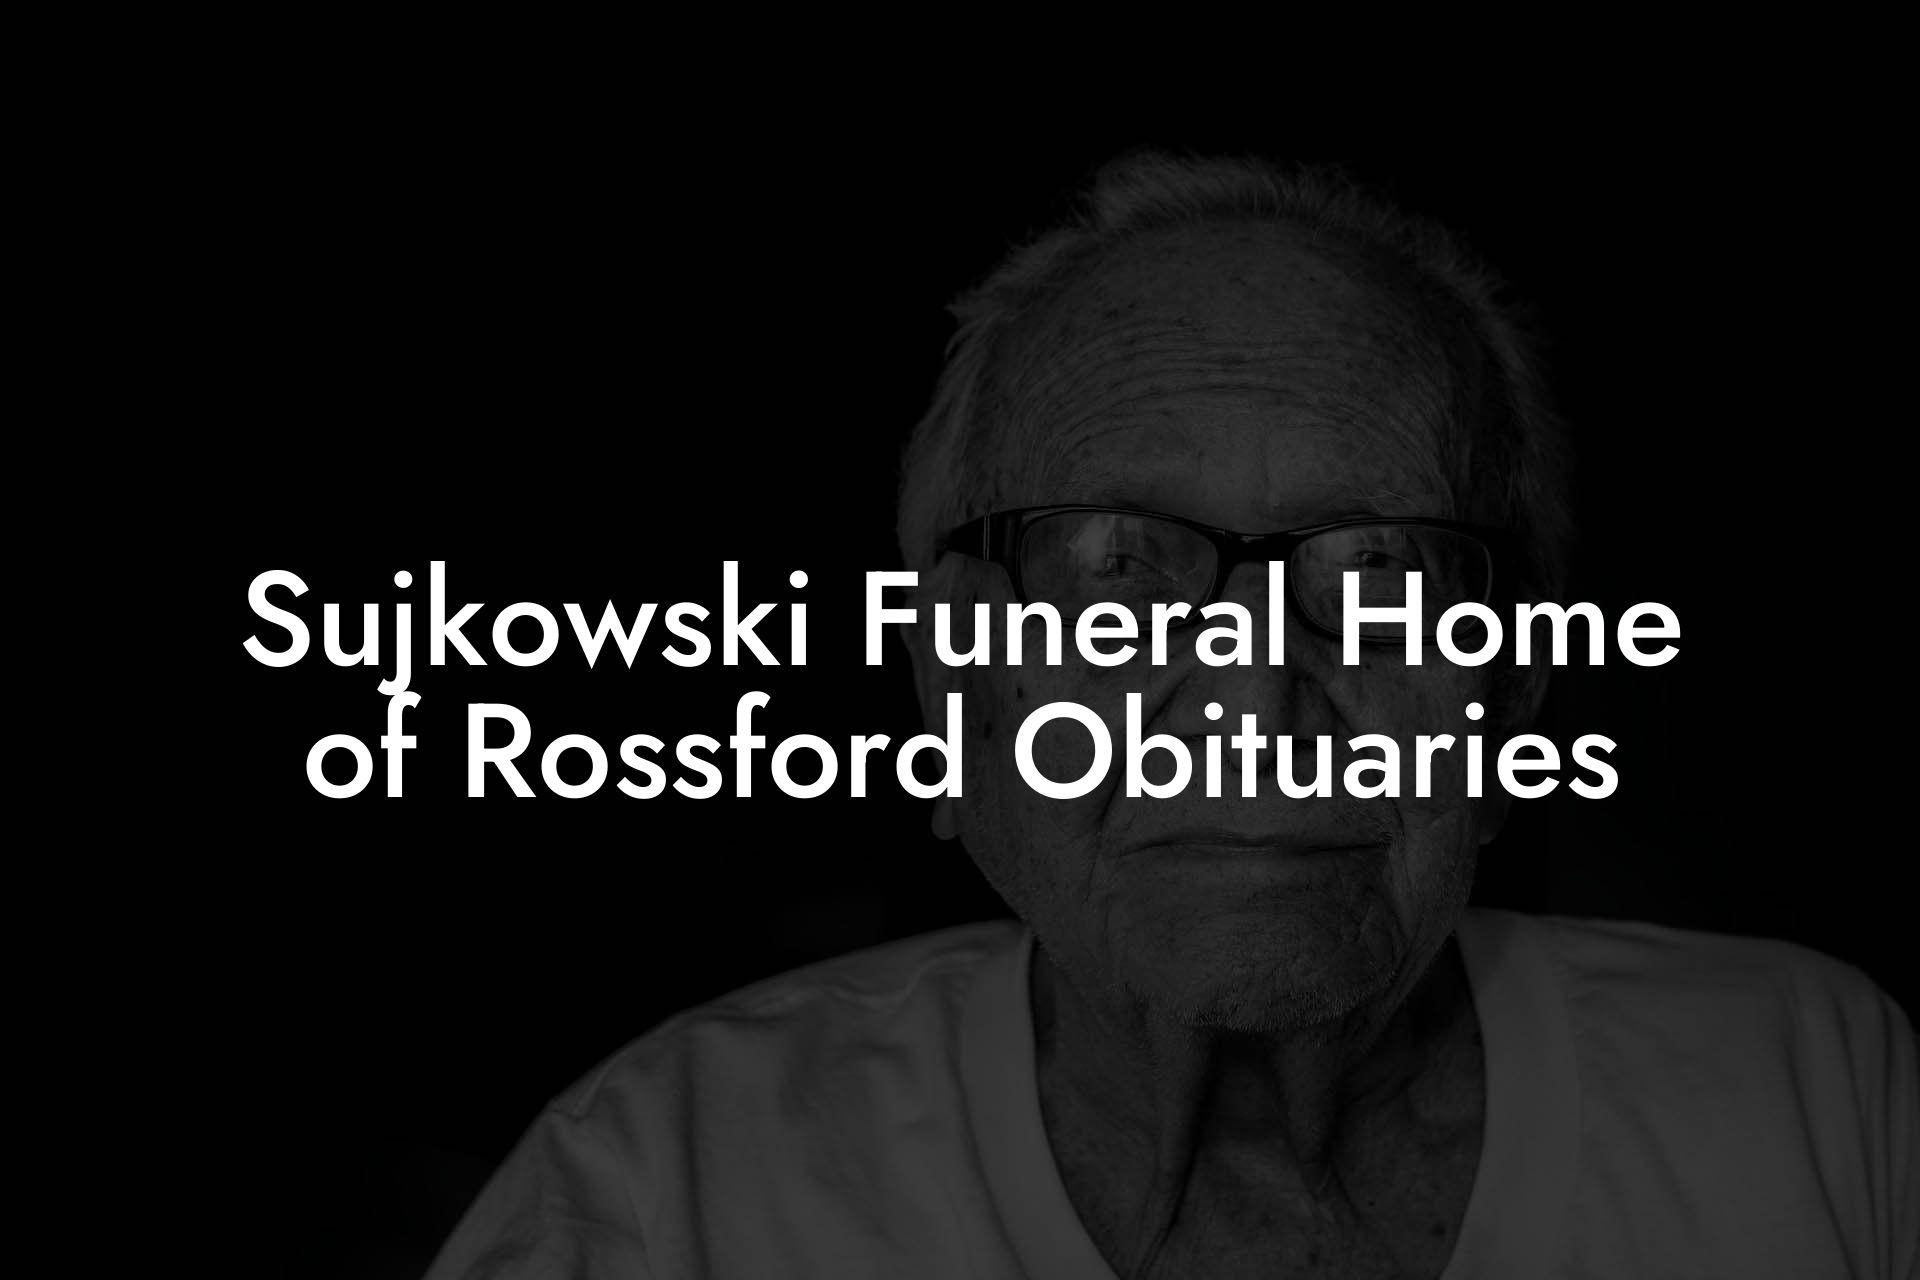 Sujkowski Funeral Home of Rossford Obituaries